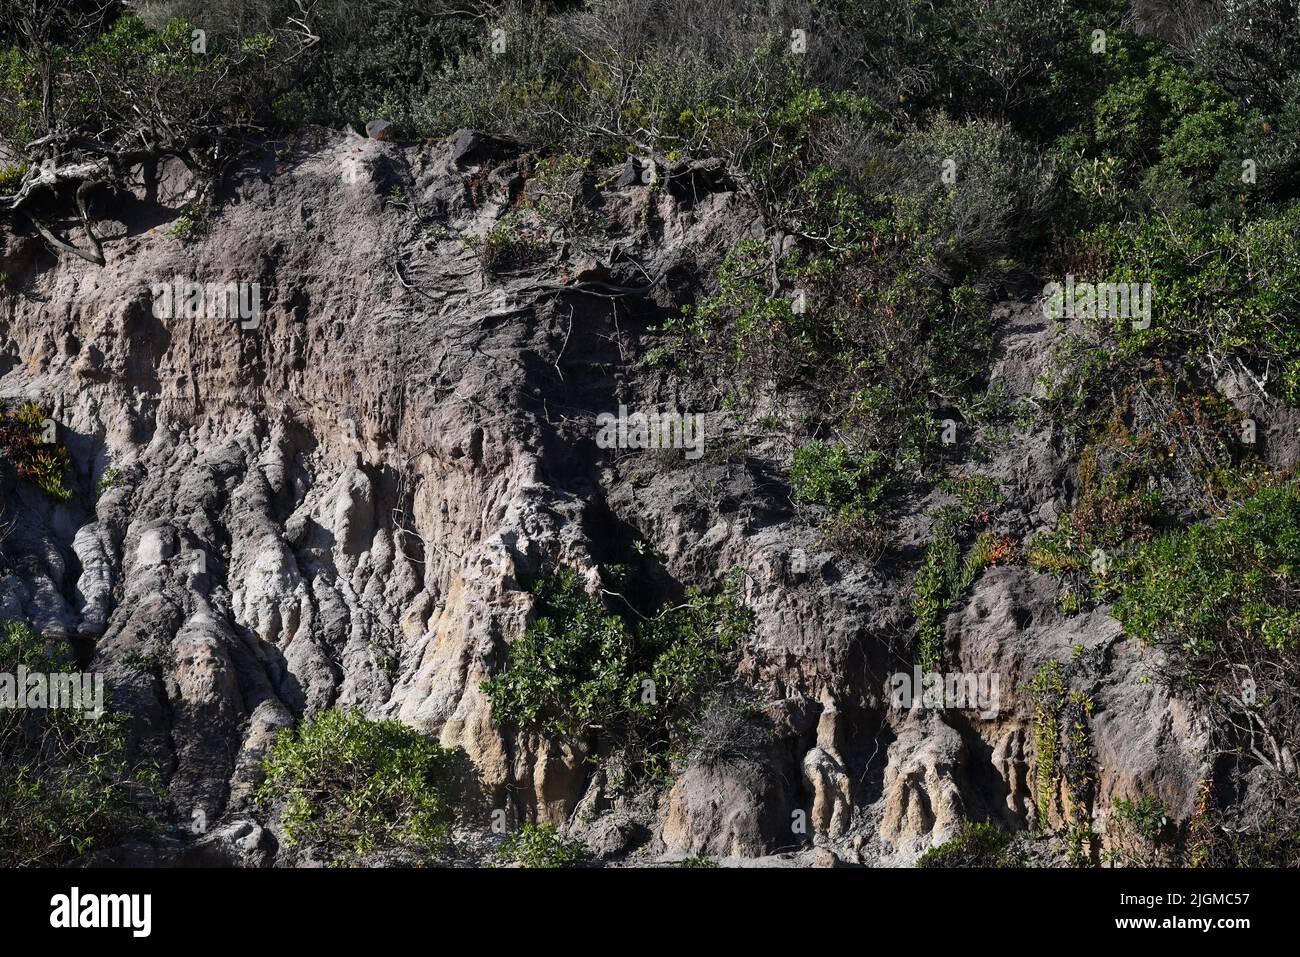 Dark cliff face, bathed in sunlight and covered by patches of vegetation Stock Photo